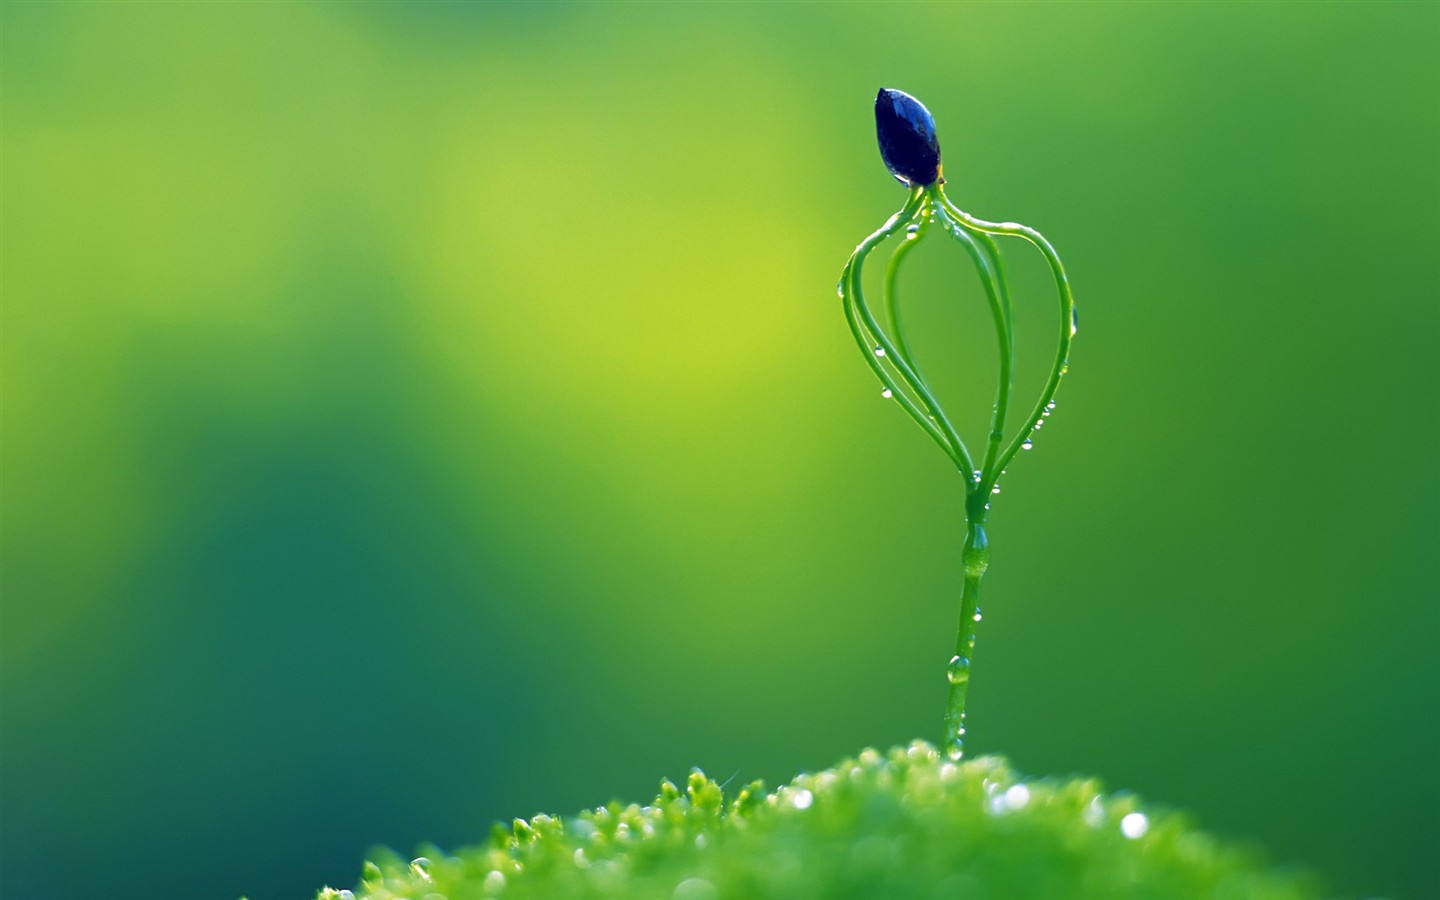 Sprout leaves HD Wallpaper (2) #39 - 1440x900